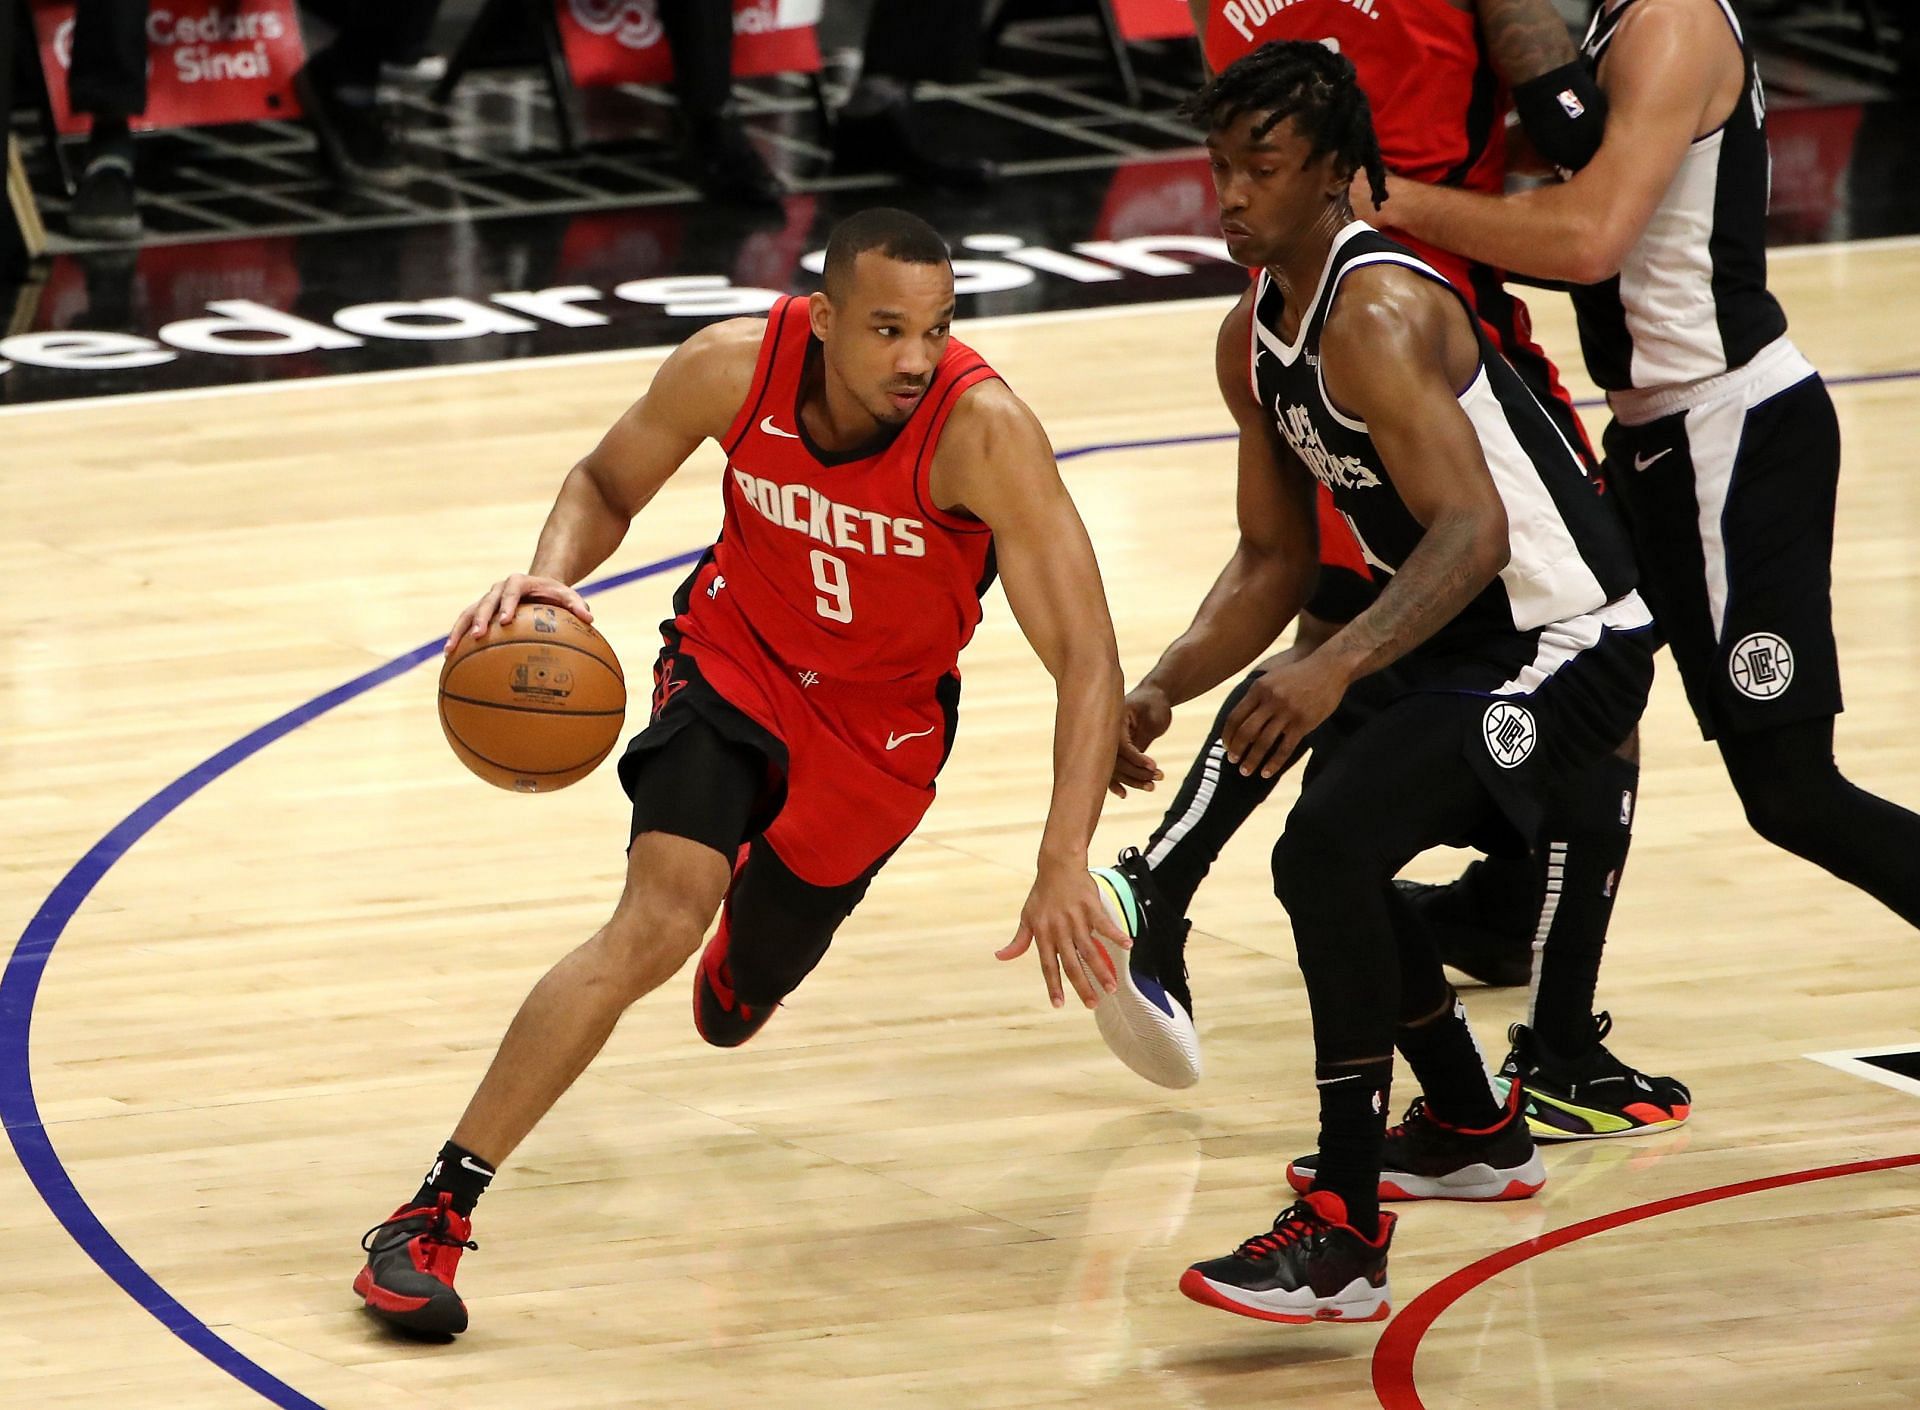 Avery Bradley previously played for the Houston Rockets before signing with the Golden State Warriors.